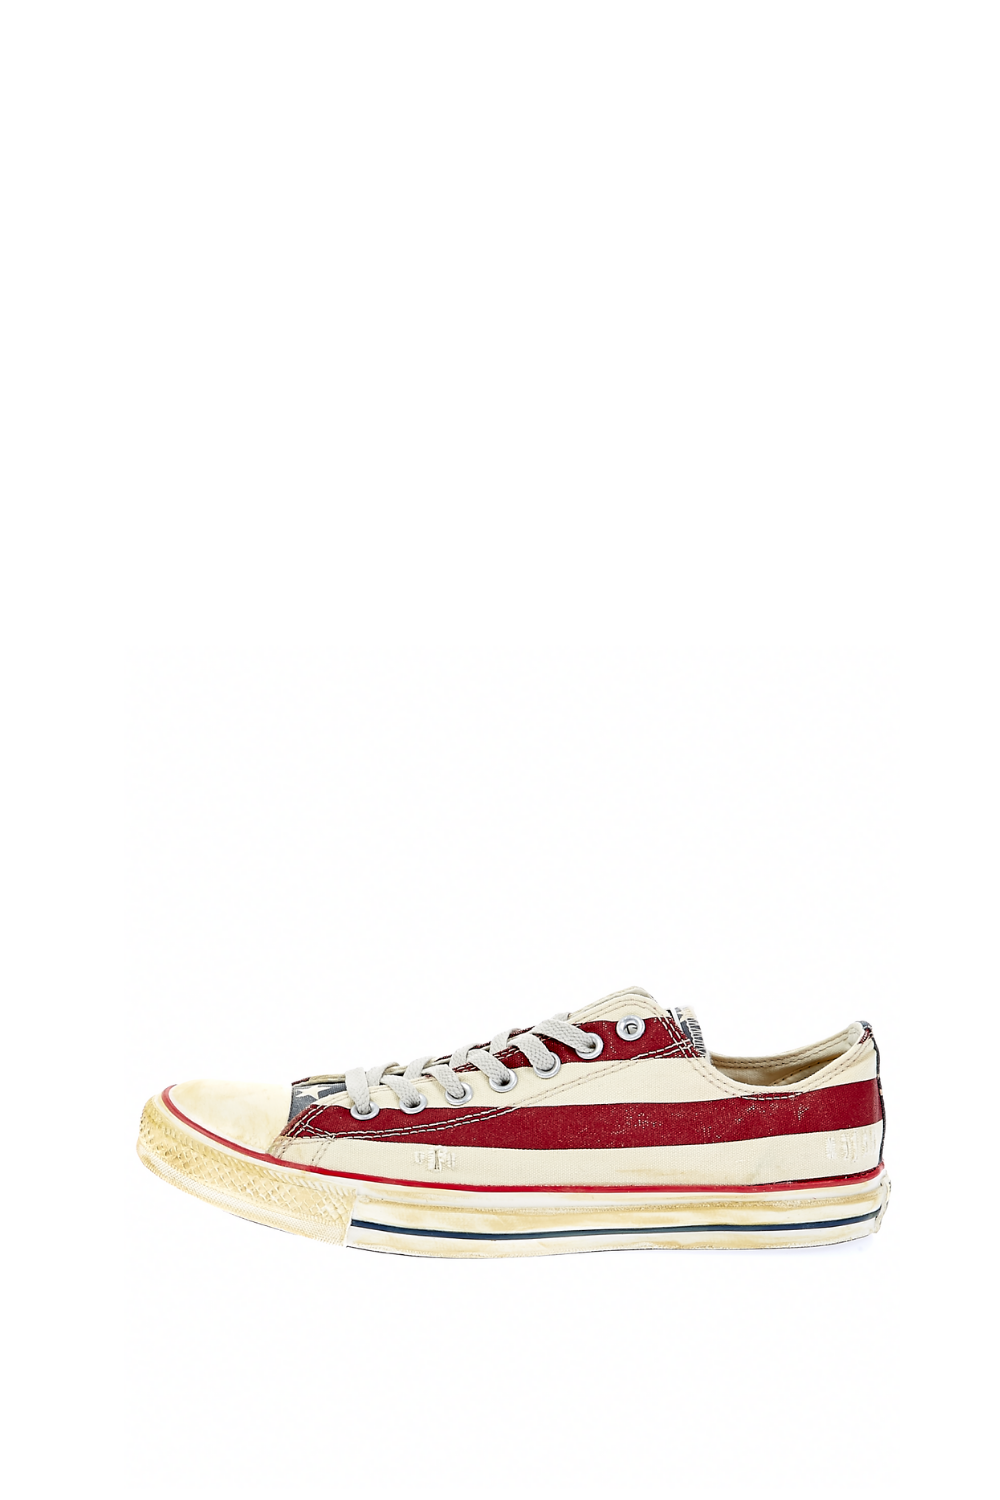 CONVERSE – Unisex sneakers CONVERSE Chuck Taylor All Star Ox λευκά κόκκινα